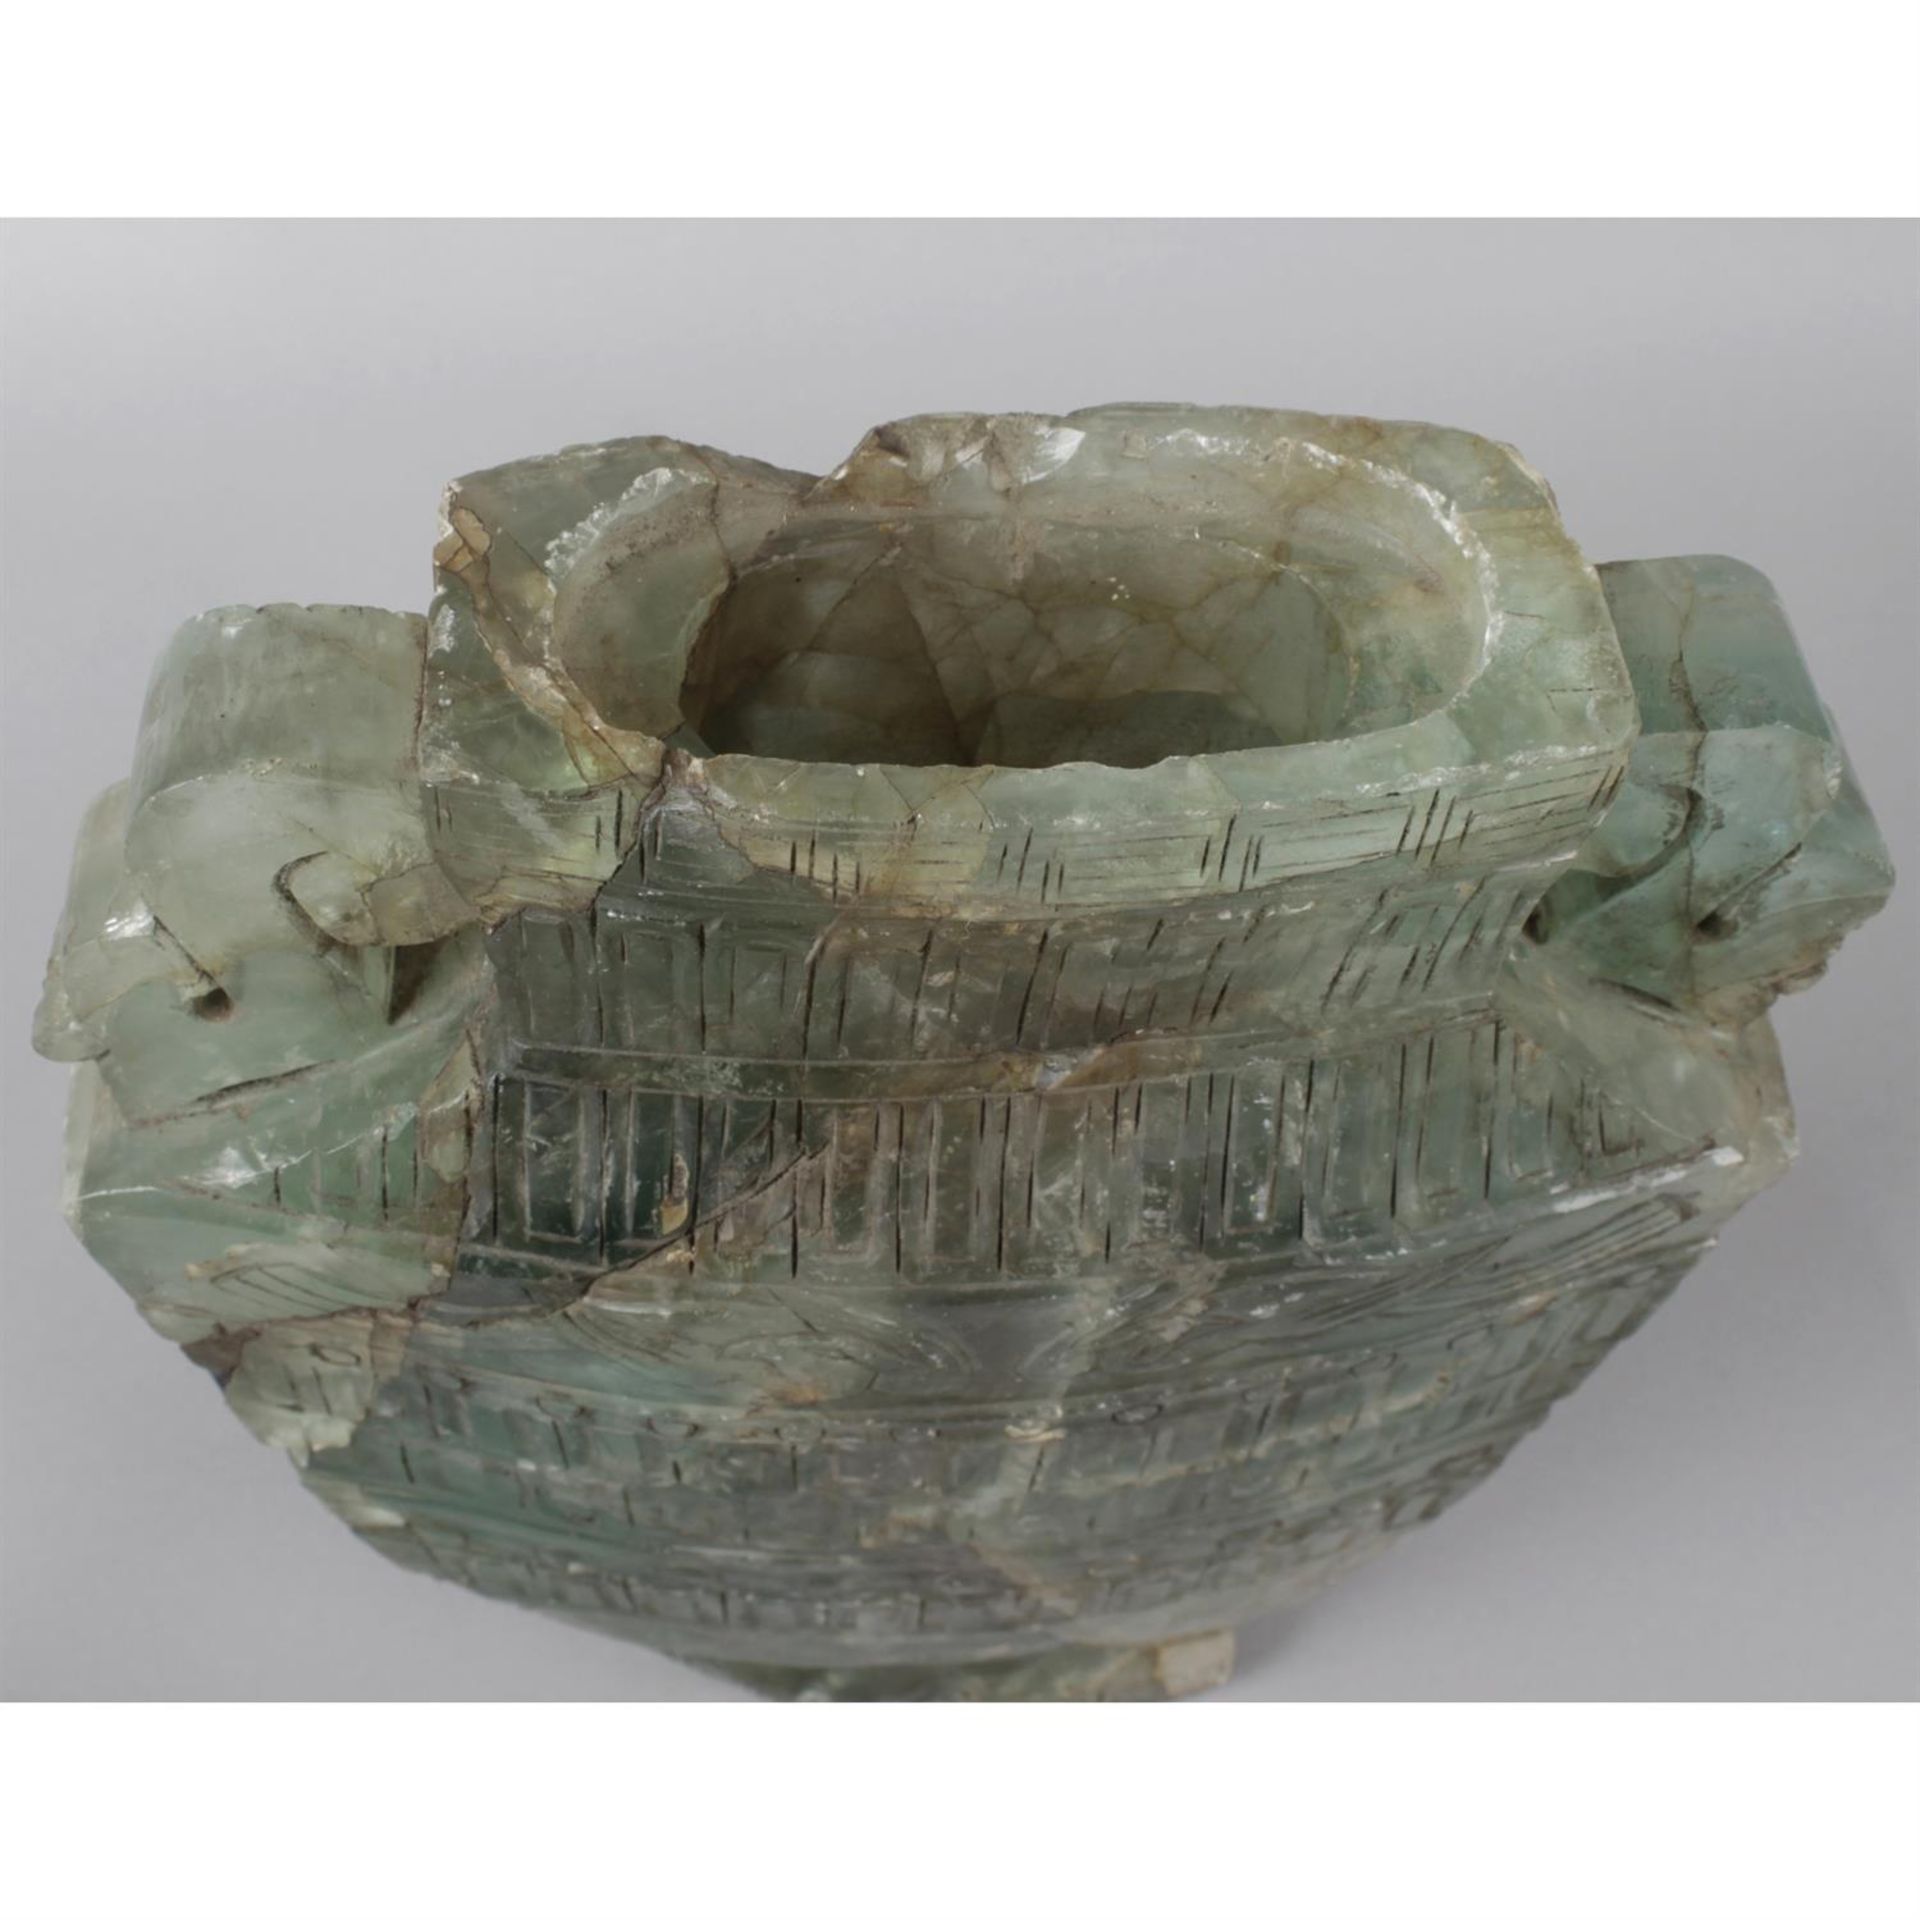 Green fluorite vase and cover. - Image 2 of 3